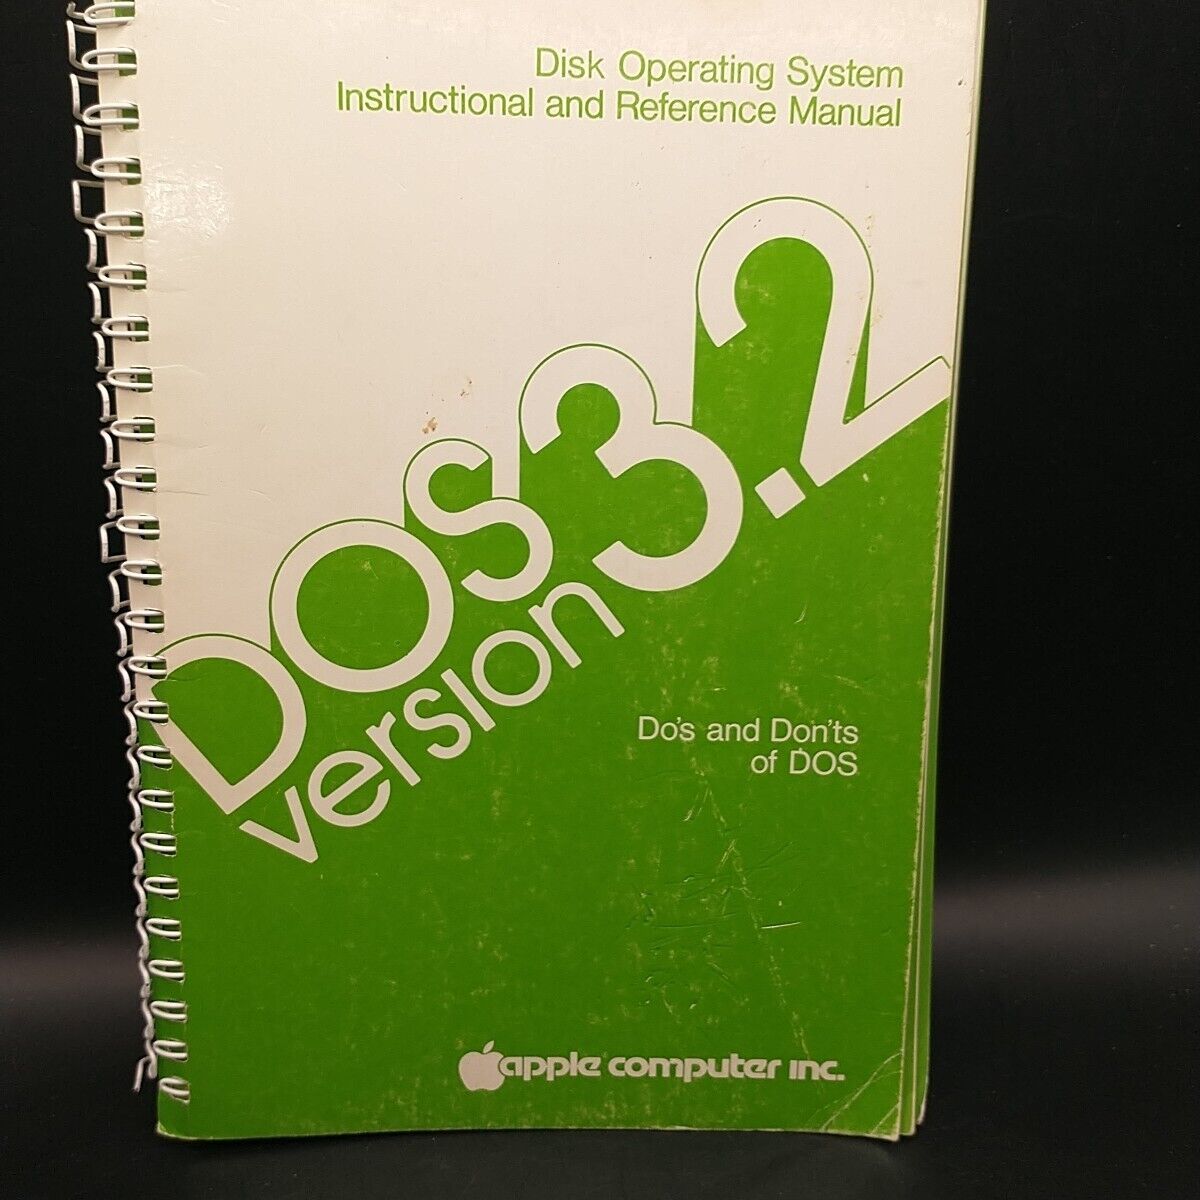 Apple Computer Inc. DOS 3.2 Version Instruction and Reference Manual 1979